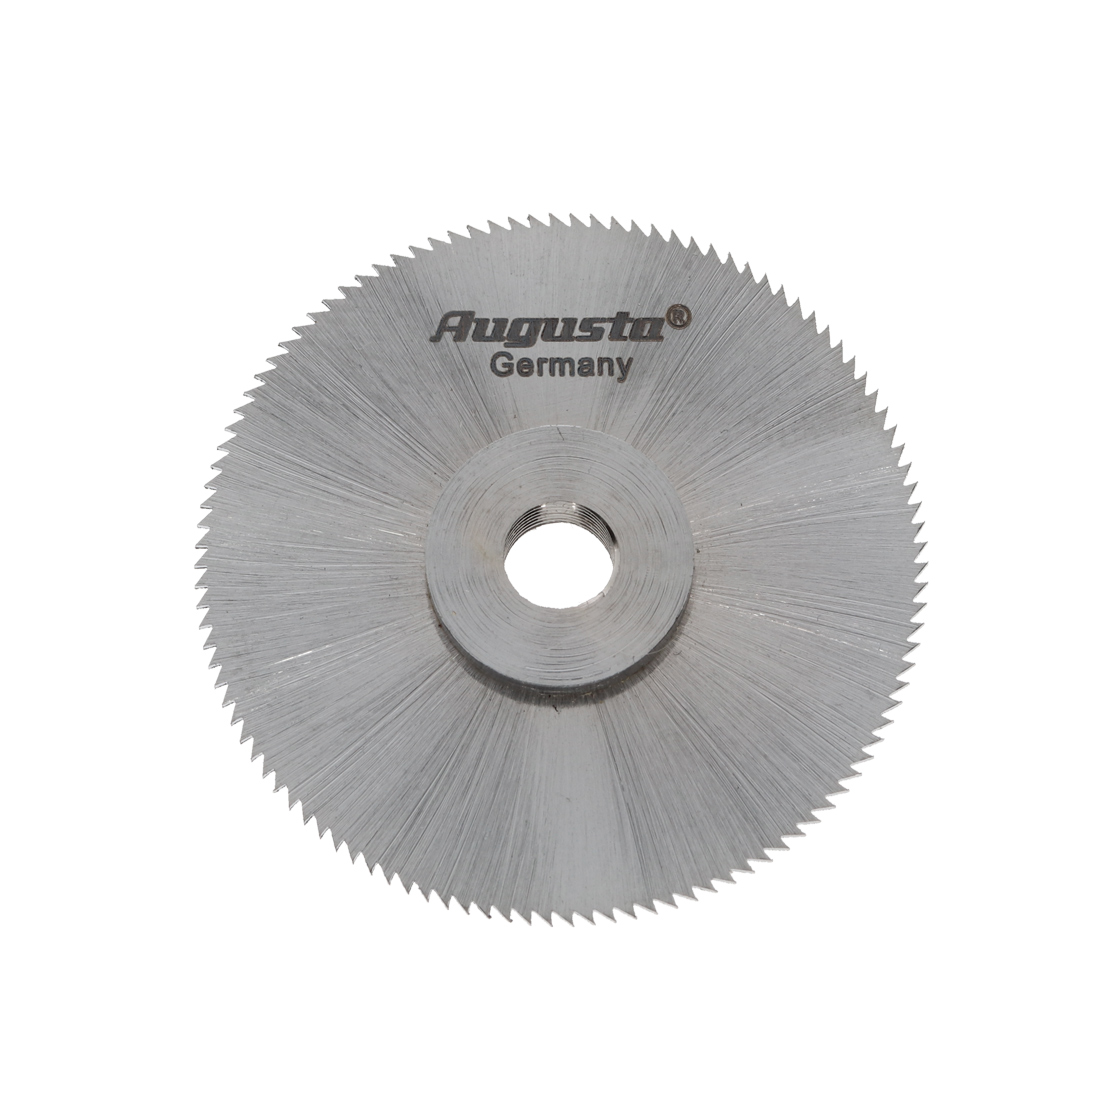 Spare saw blade for